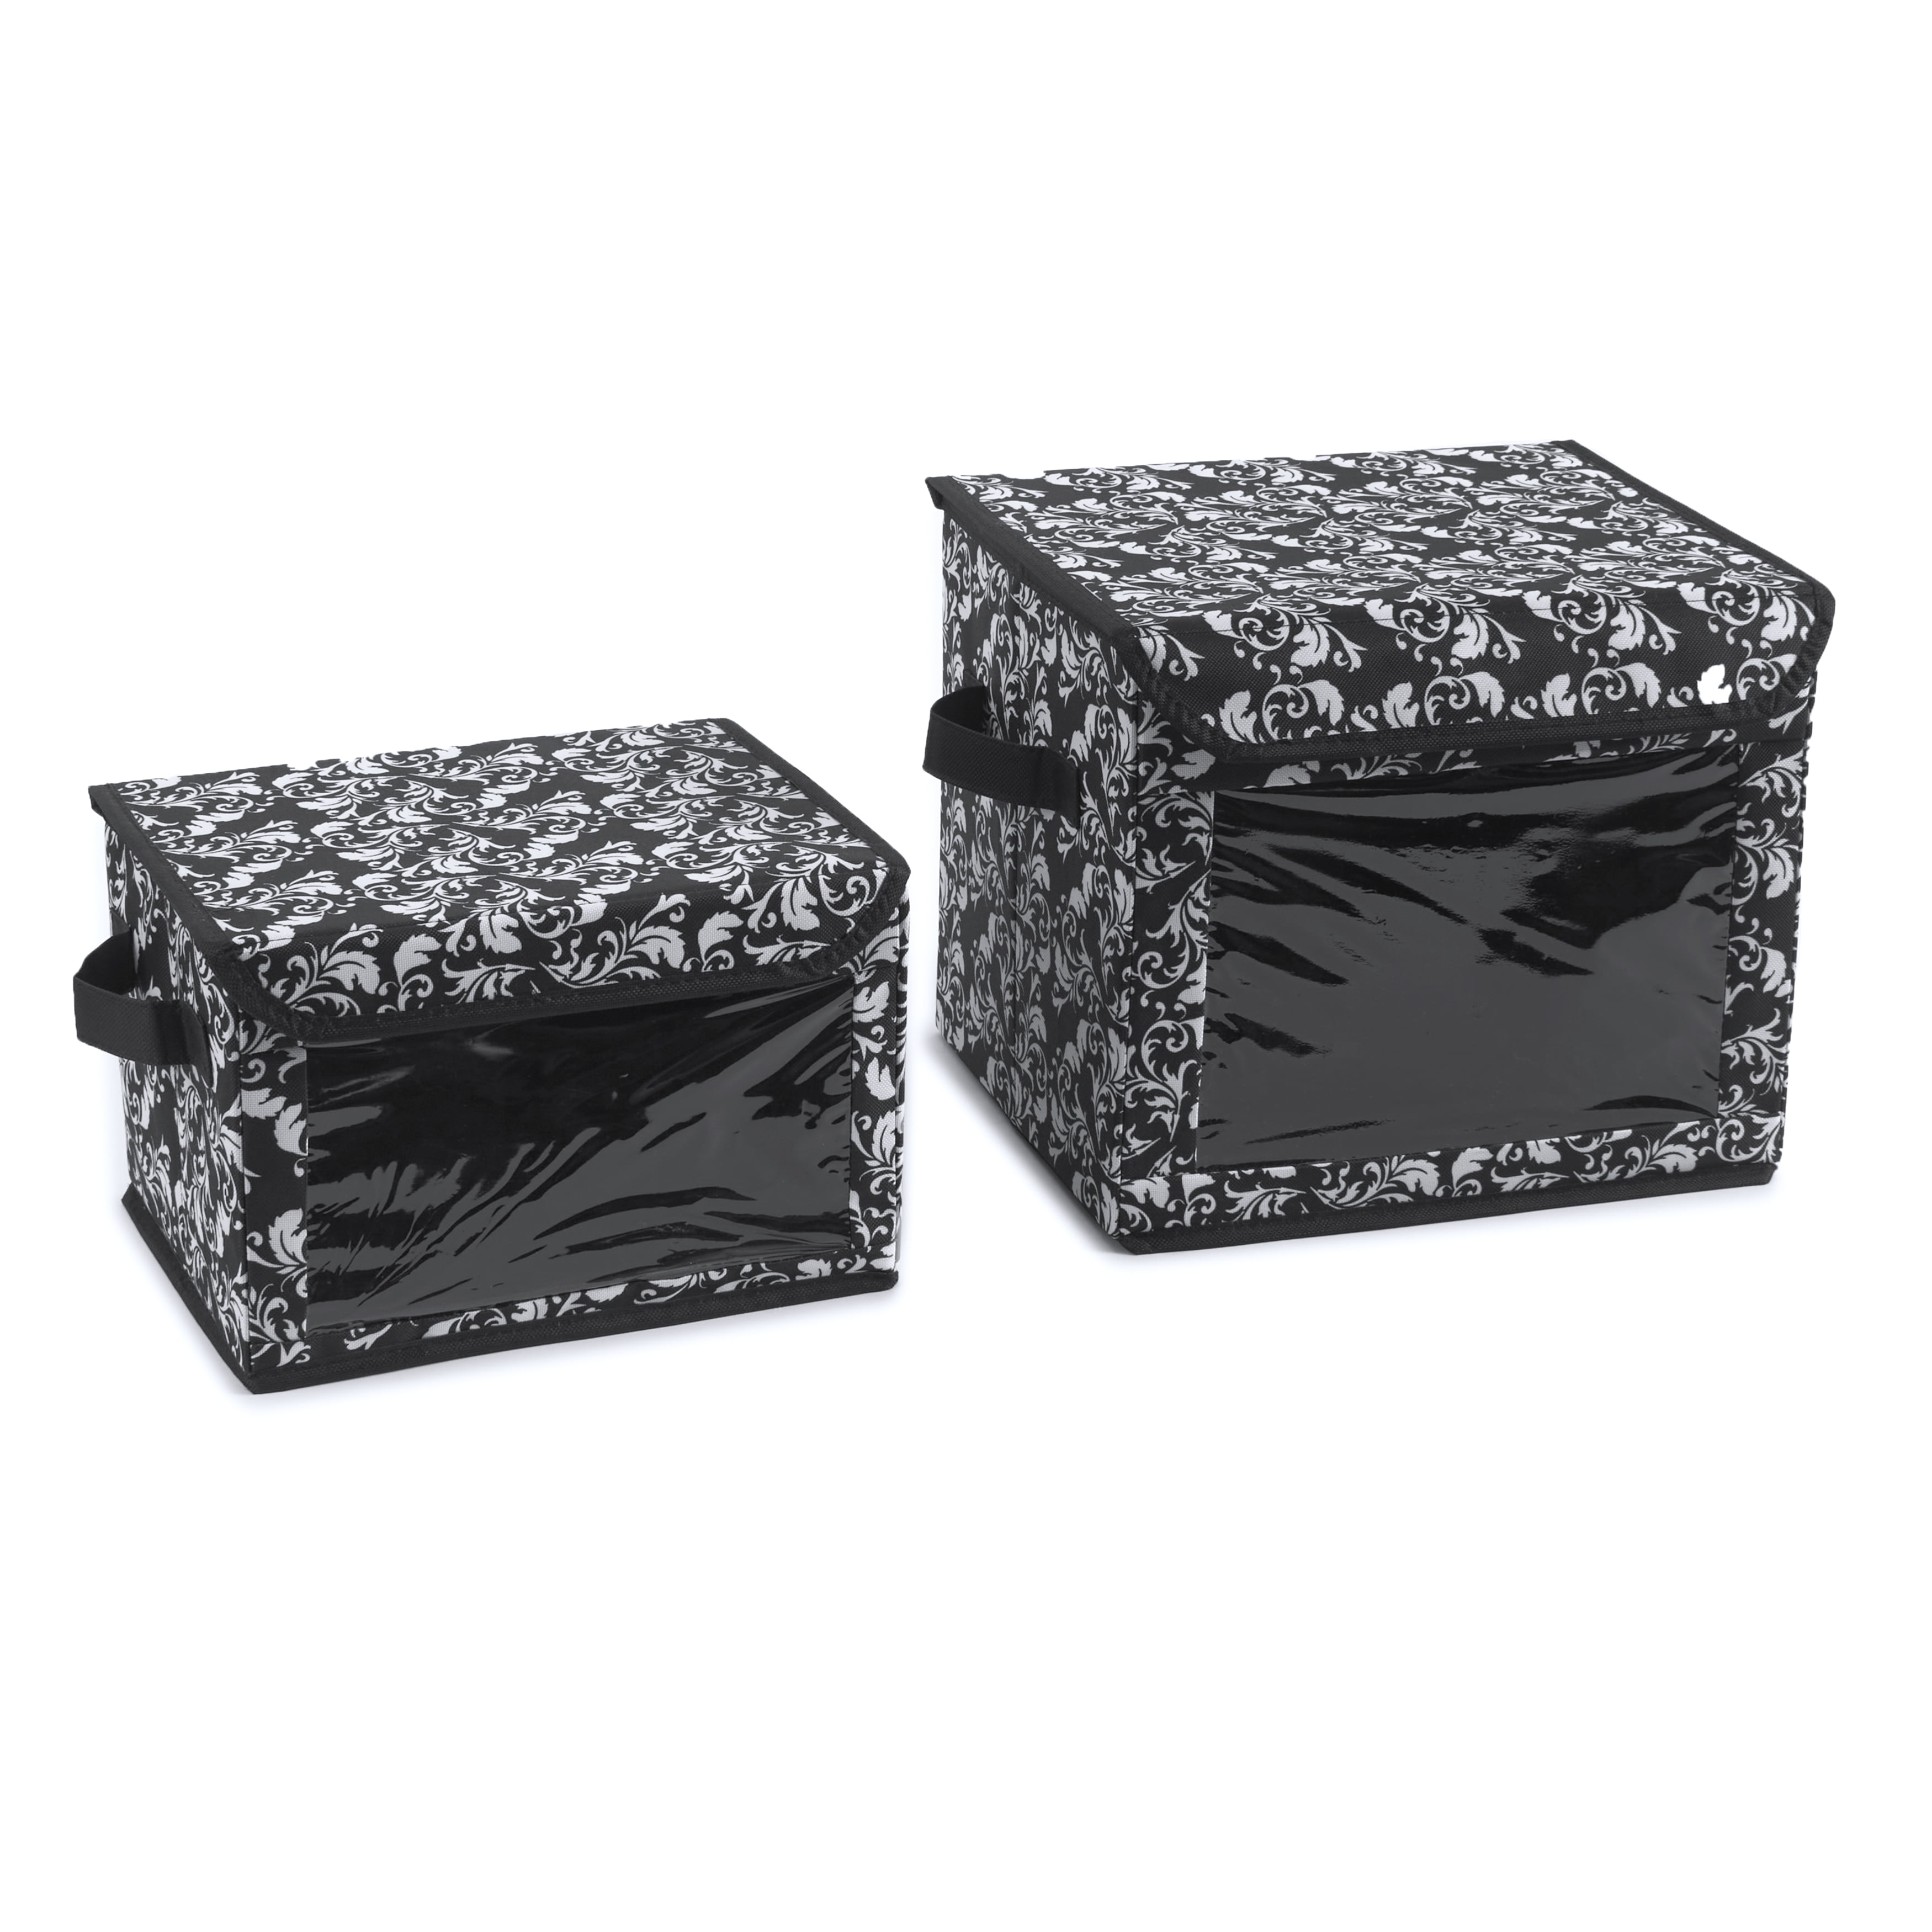 S&W Home Decor 19 Gallon Collapsible Storage Boxes - Set of 2 - 21611394